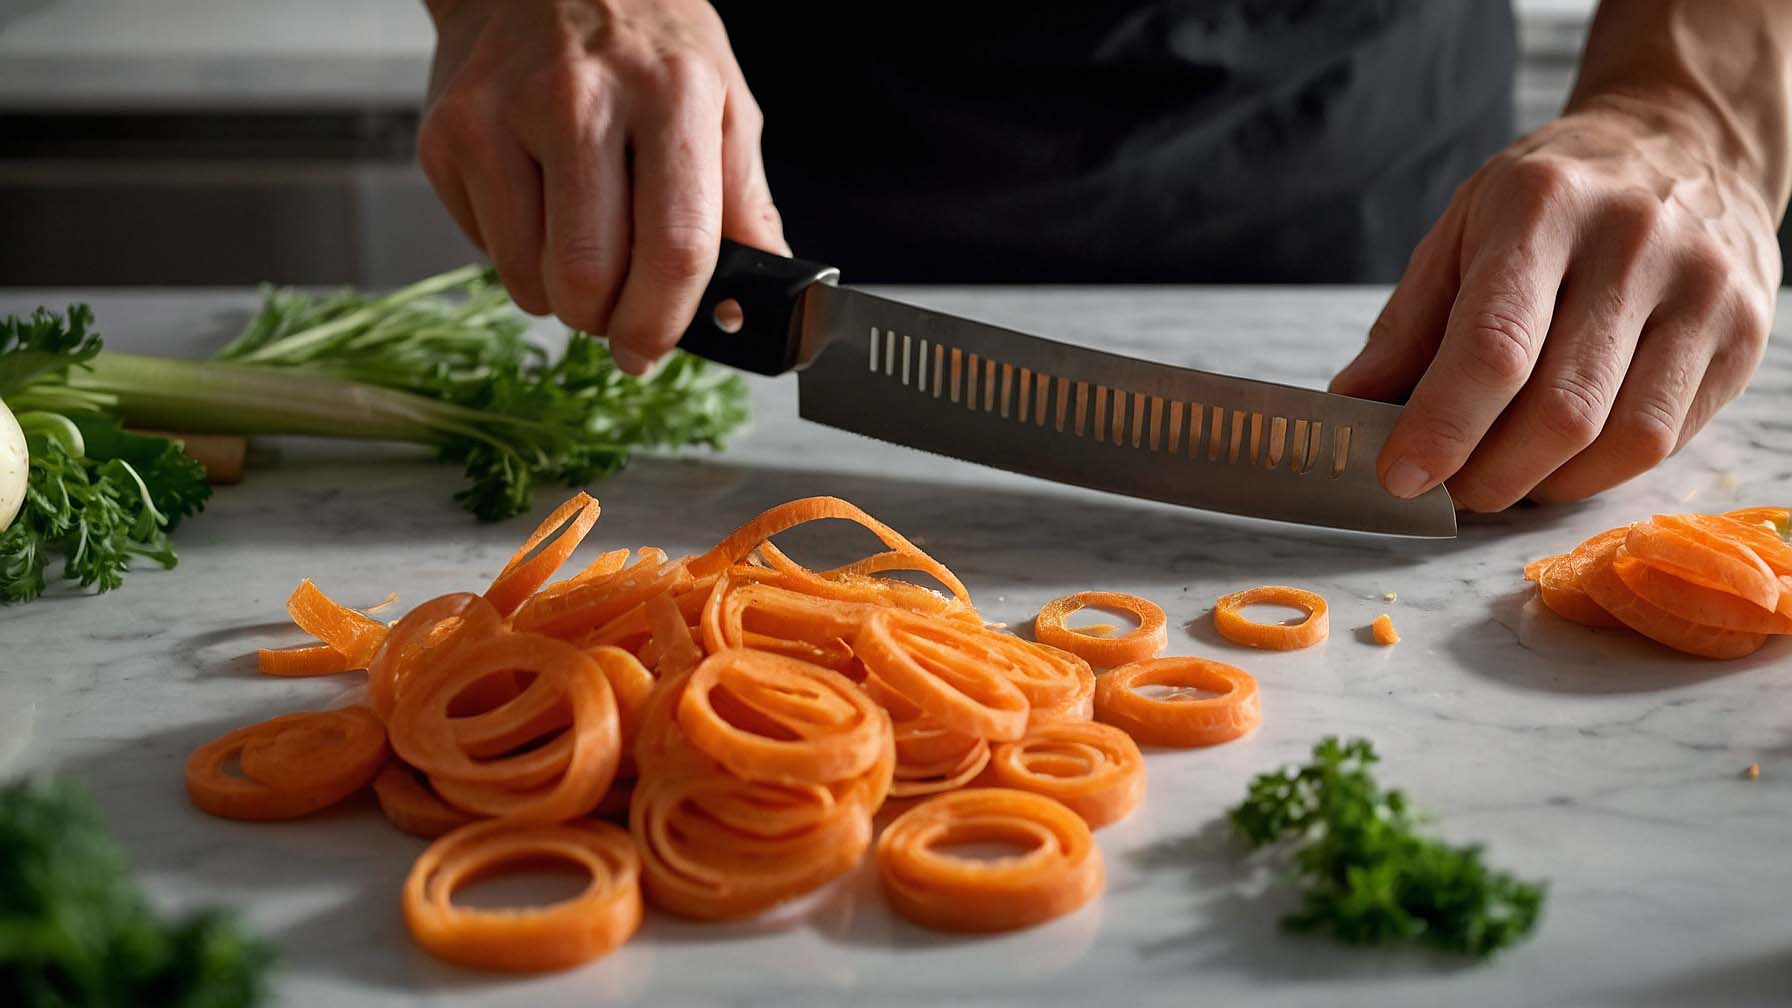 How to Crinkle Cut Carrots